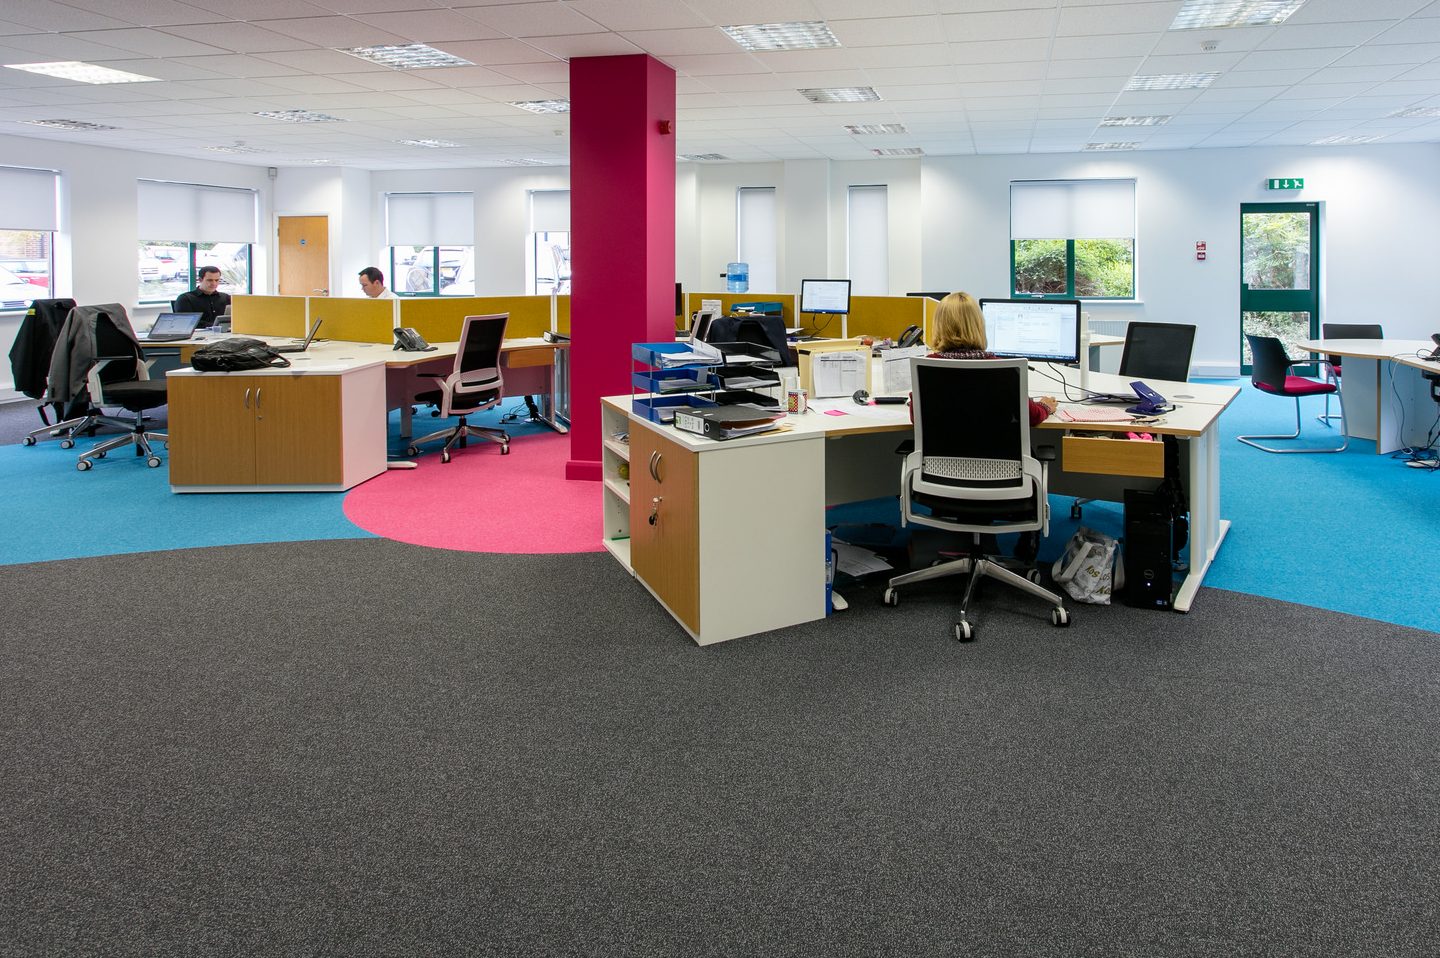 Variety of colour schemes in office environment